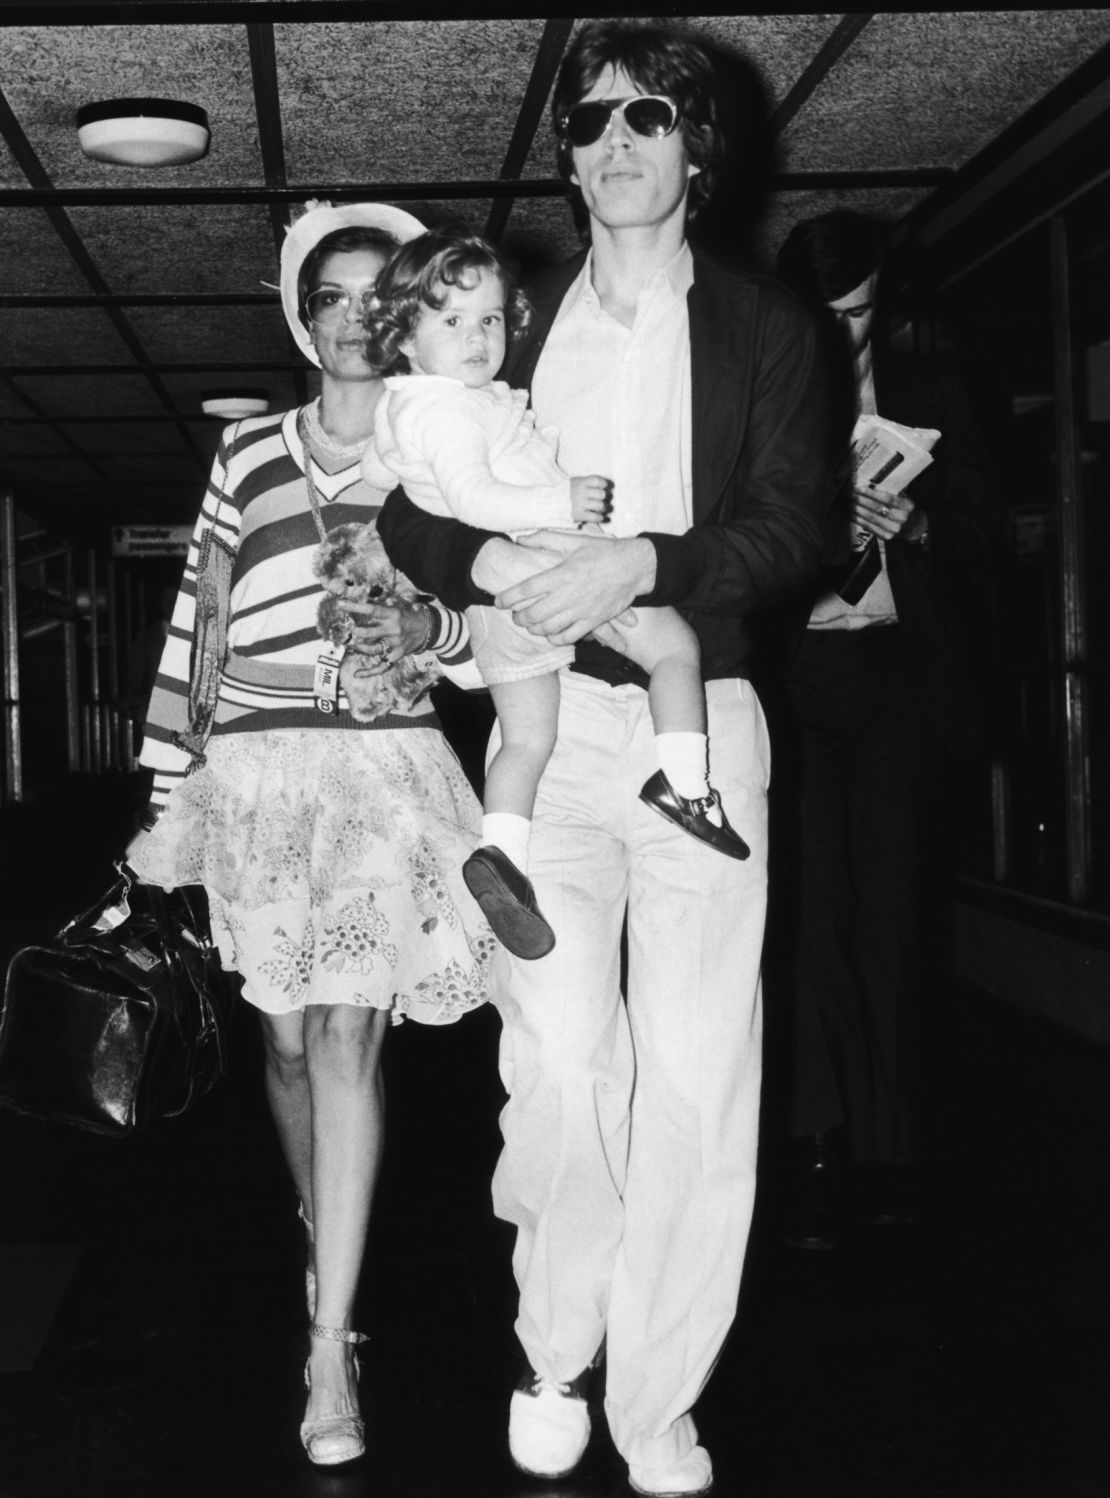 Jade Jagger (center) with parents Mick and Bianca Jagger in 1974.